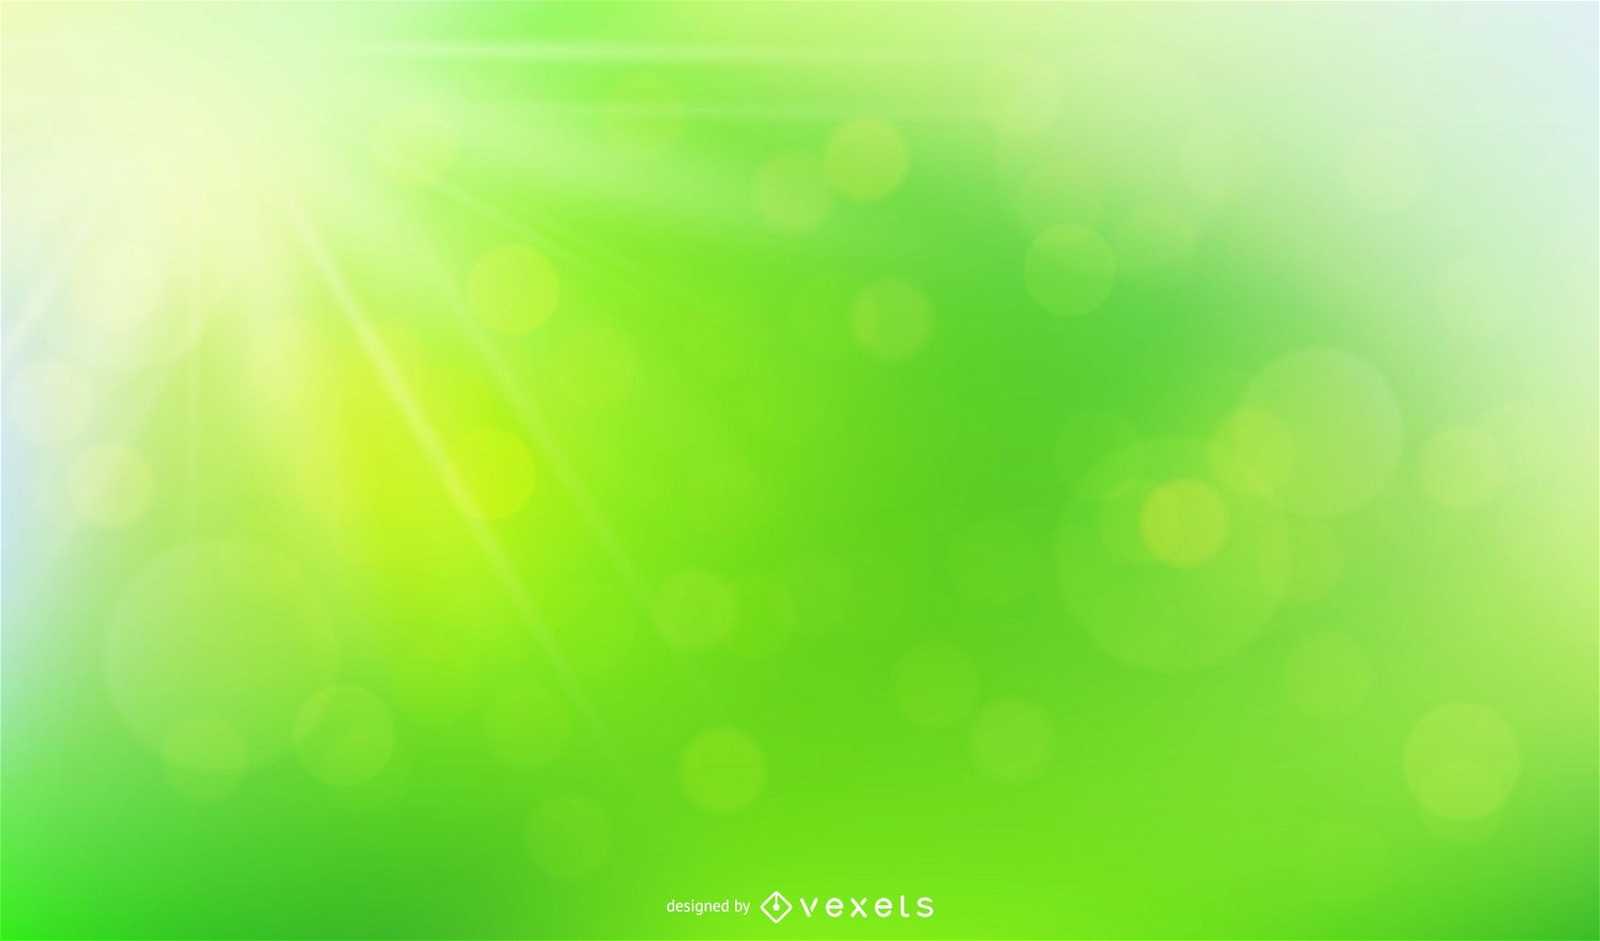 Green Background Images & Wallpapers: Free Download | Fotor